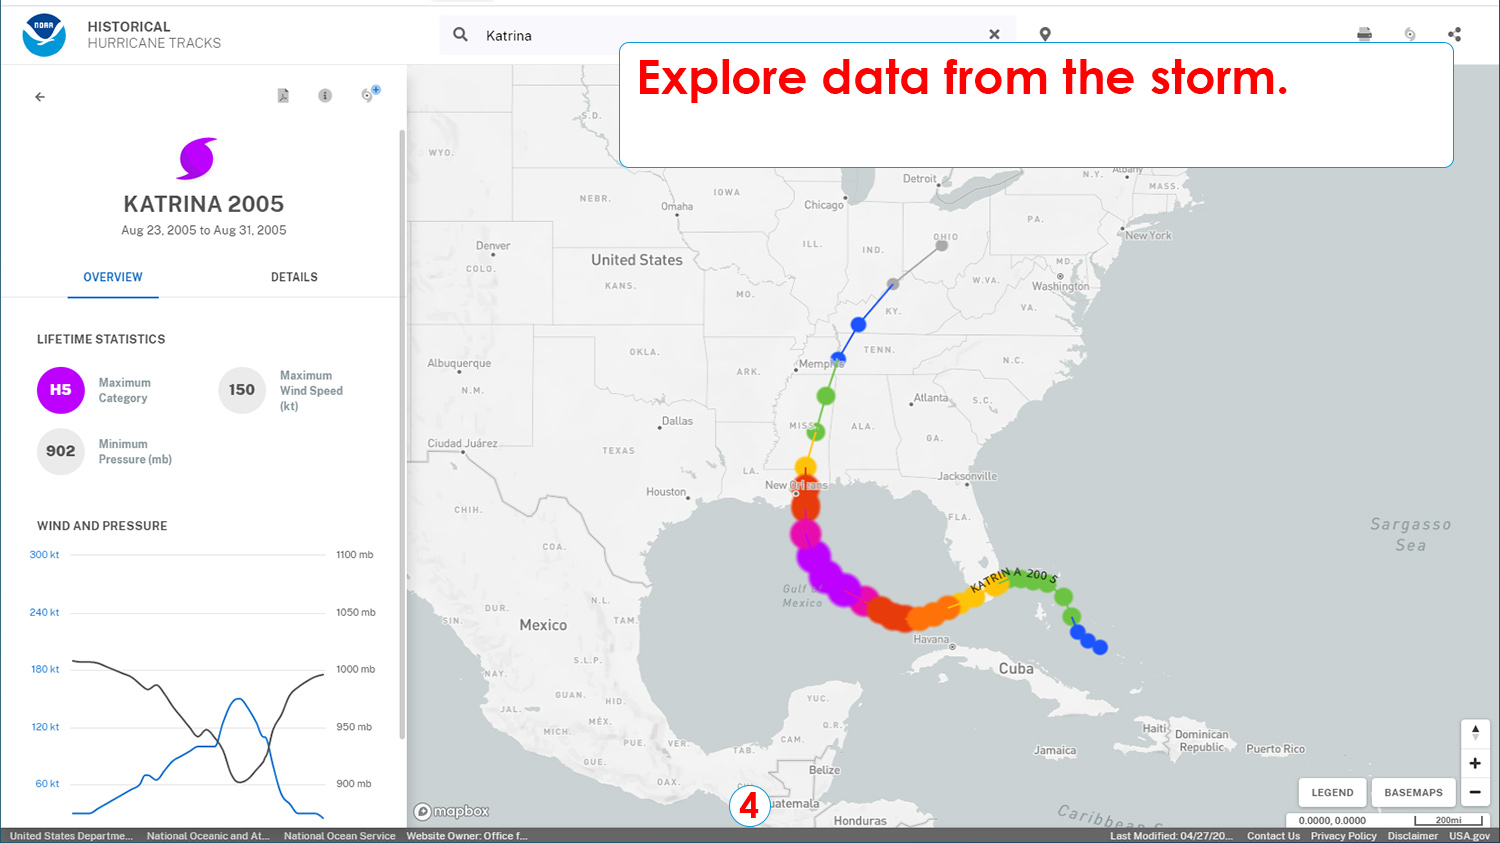 Step 4: Explore data from the storm.